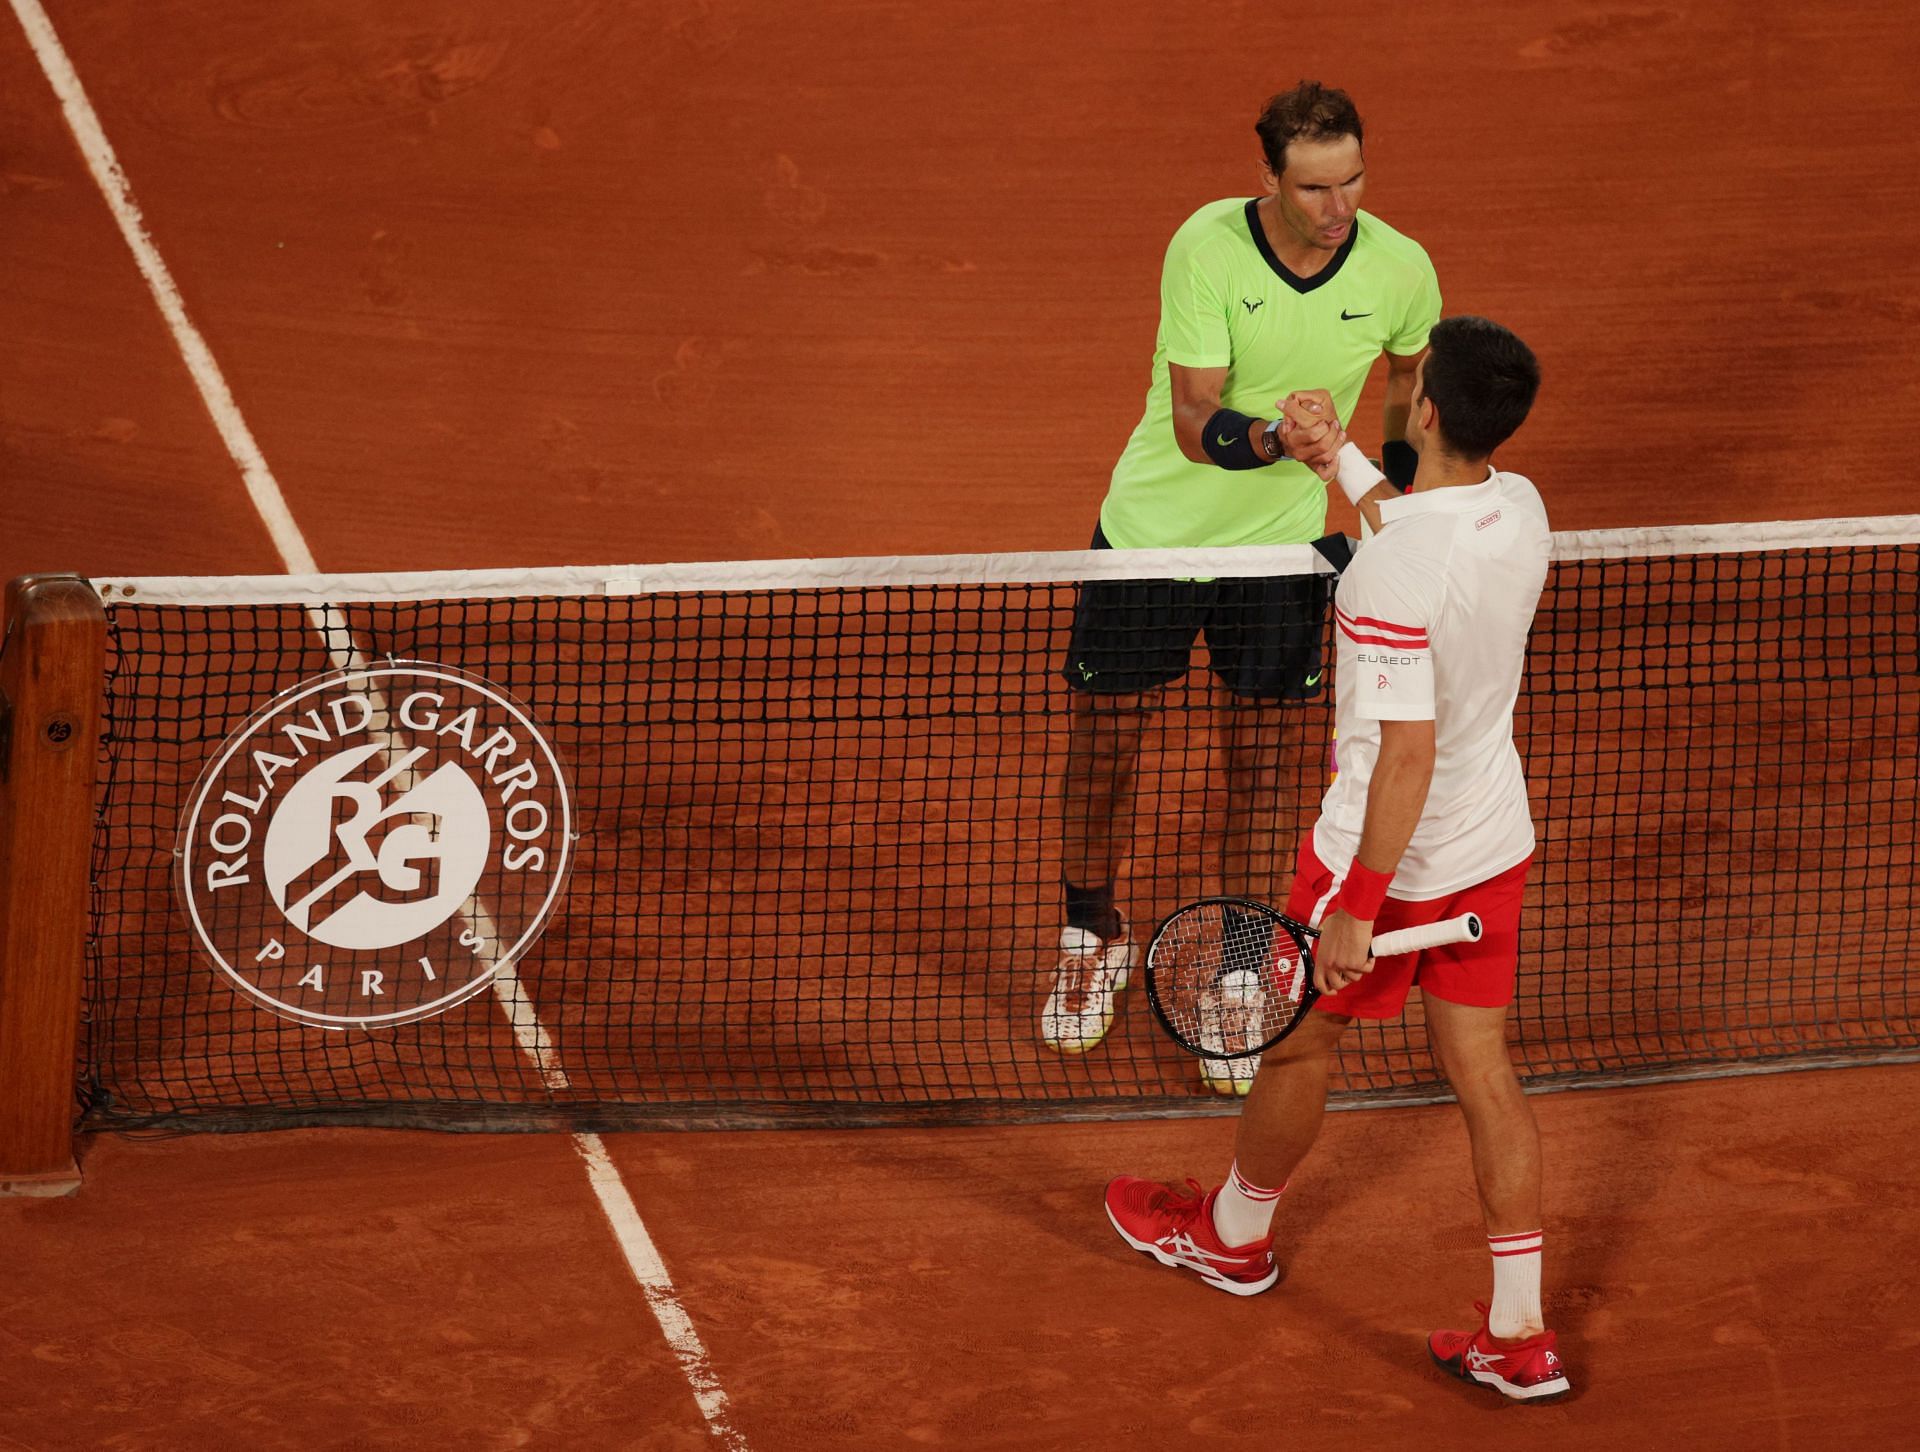 Novak Djokovic and Rafael Nadal could meet in the semifinals of the Madrid Open